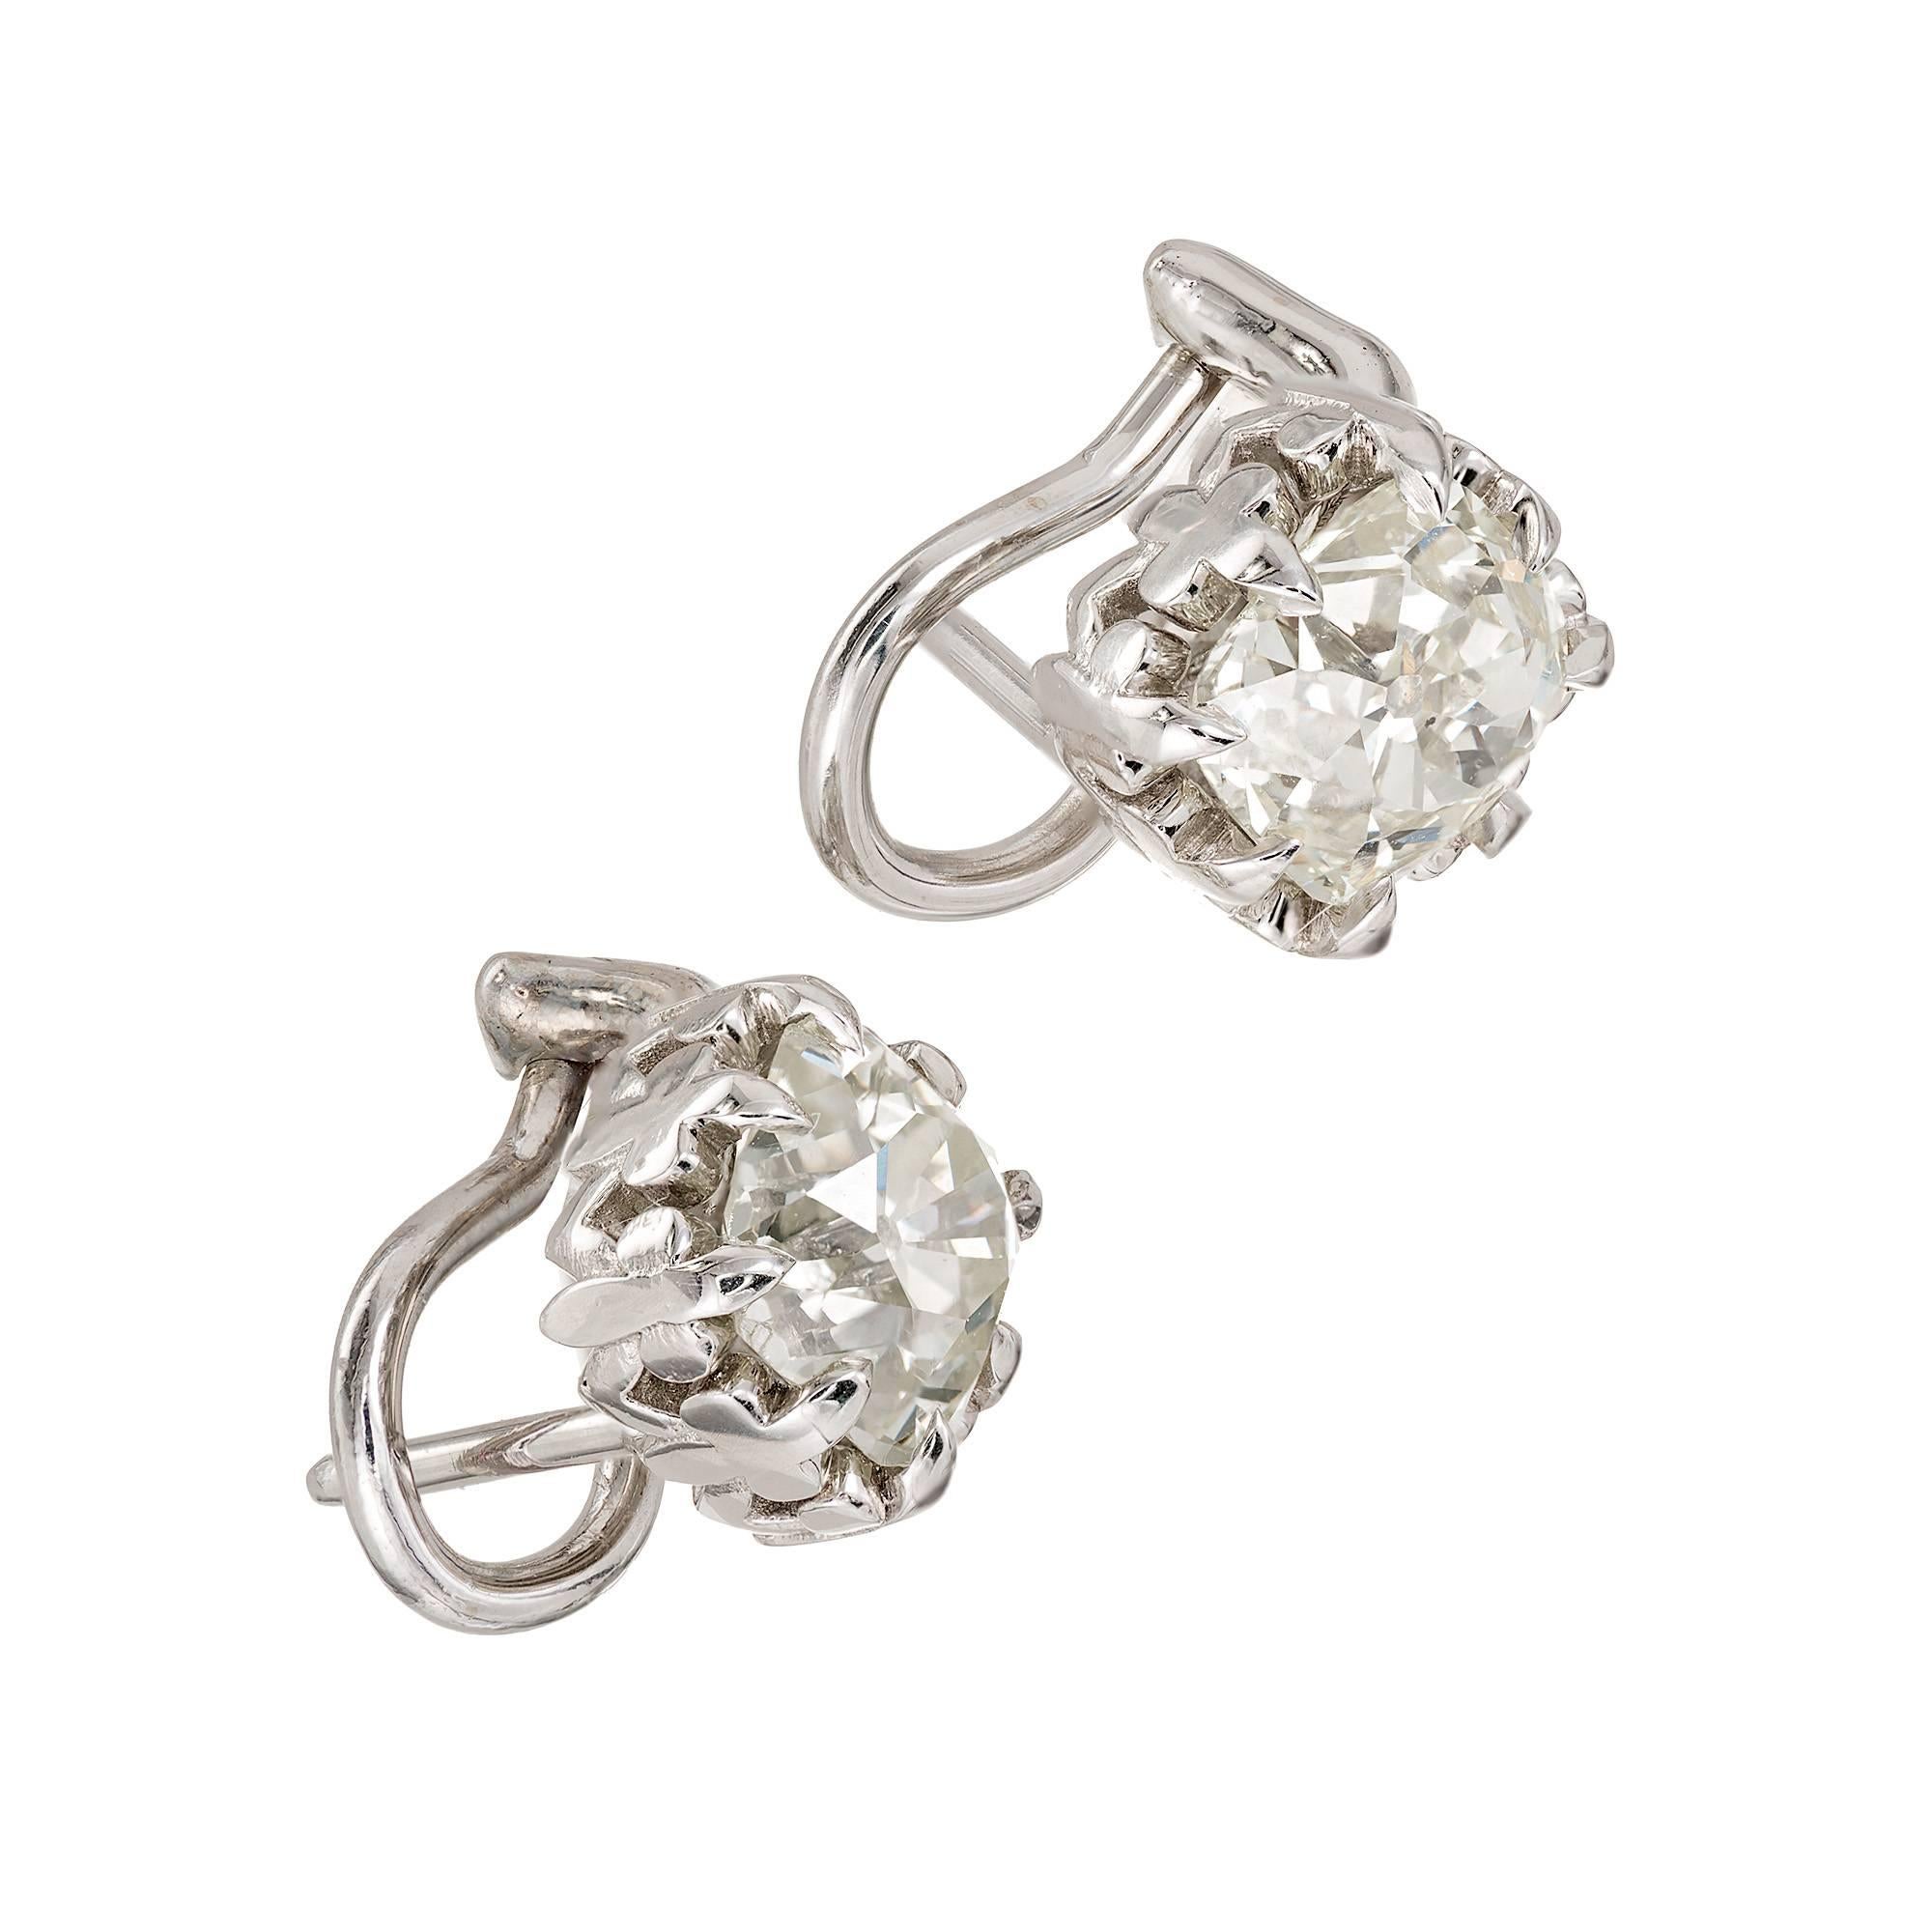 Peter Suchy diamond platinum clip post fancy gallery old mine cushion cut diamond earrings. 3.10 carats total with safe and secure clip and post.  

1 cushion modified brilliant cut diamond S-T, I approximate 1.60 carats.  GIA Certificate #